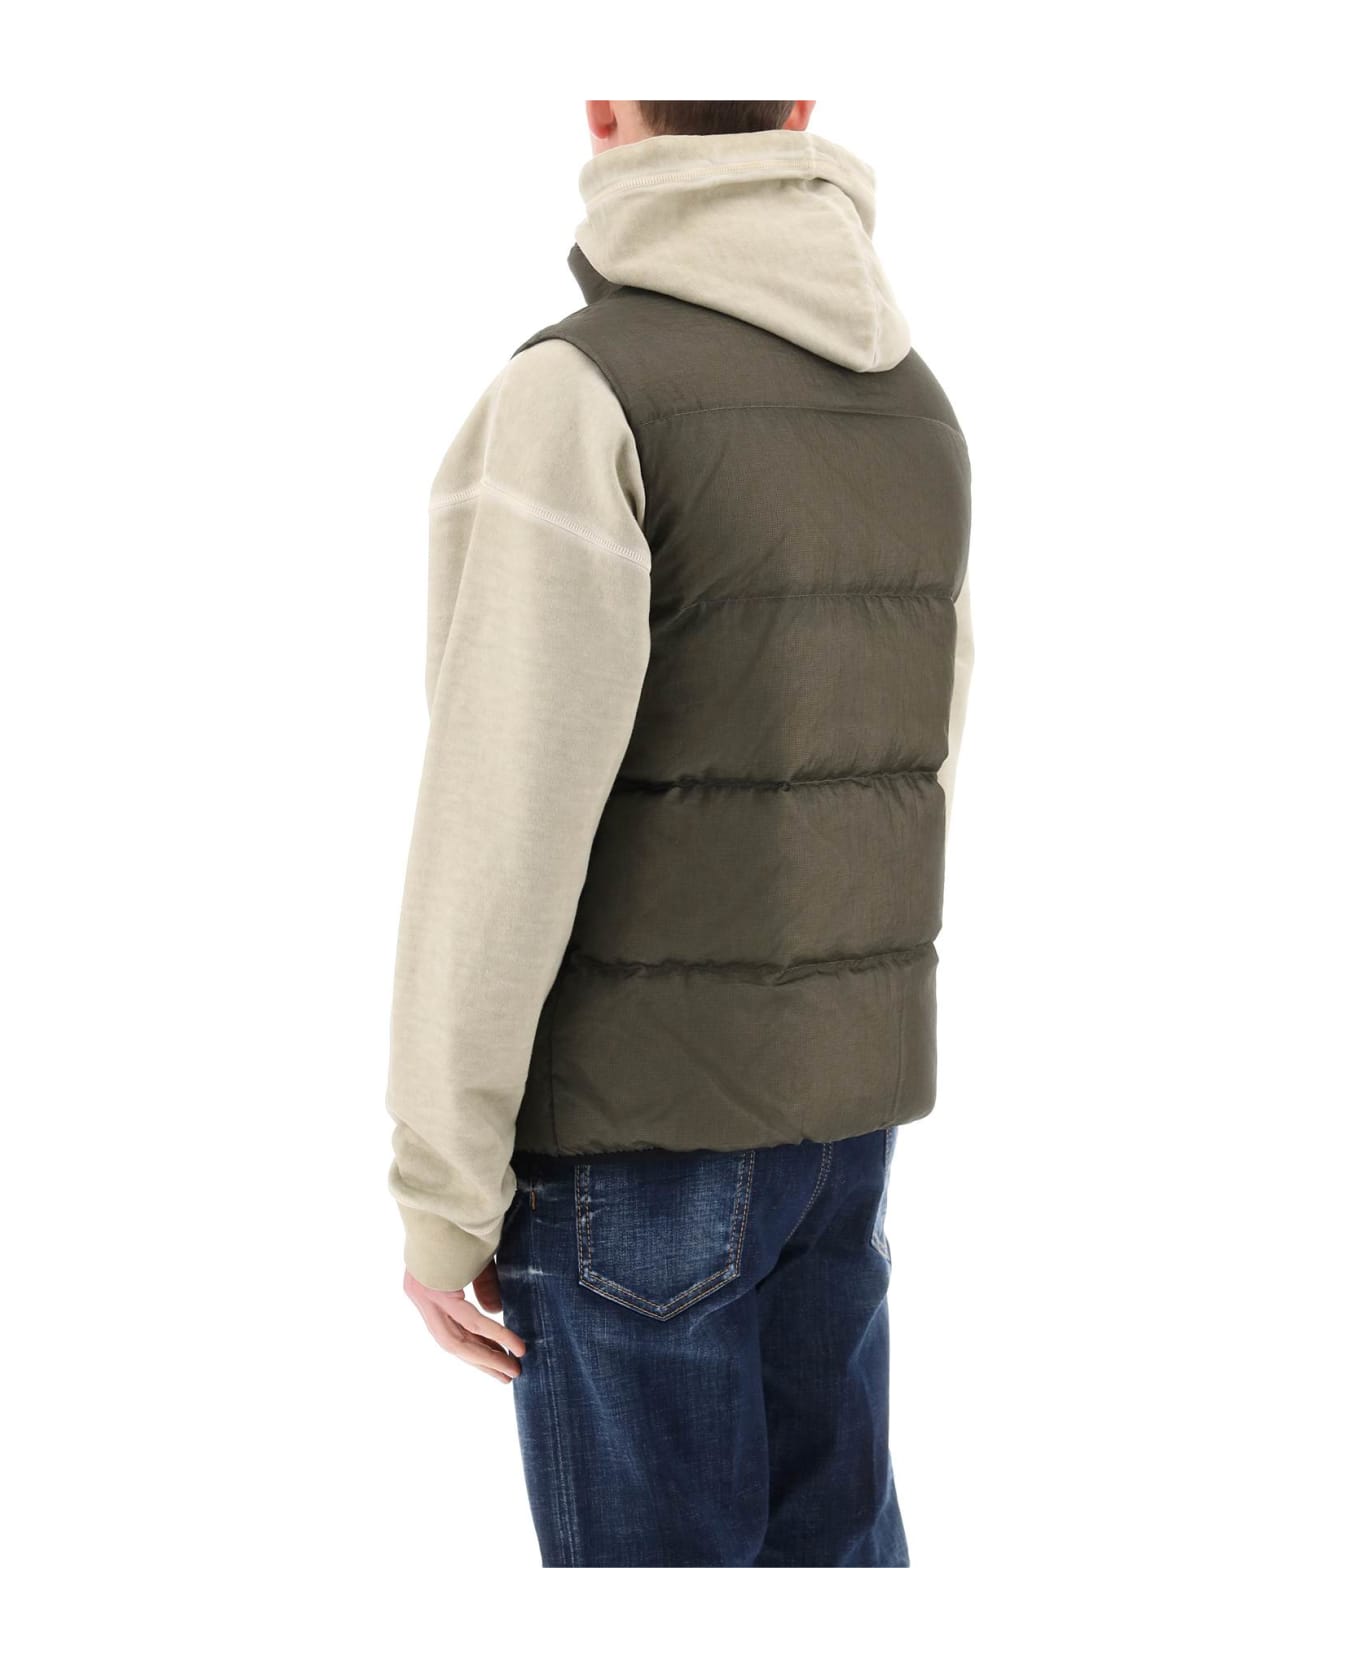 Dsquared2 Ripstop Puffer Vest - MILITARY GREEN (Green)